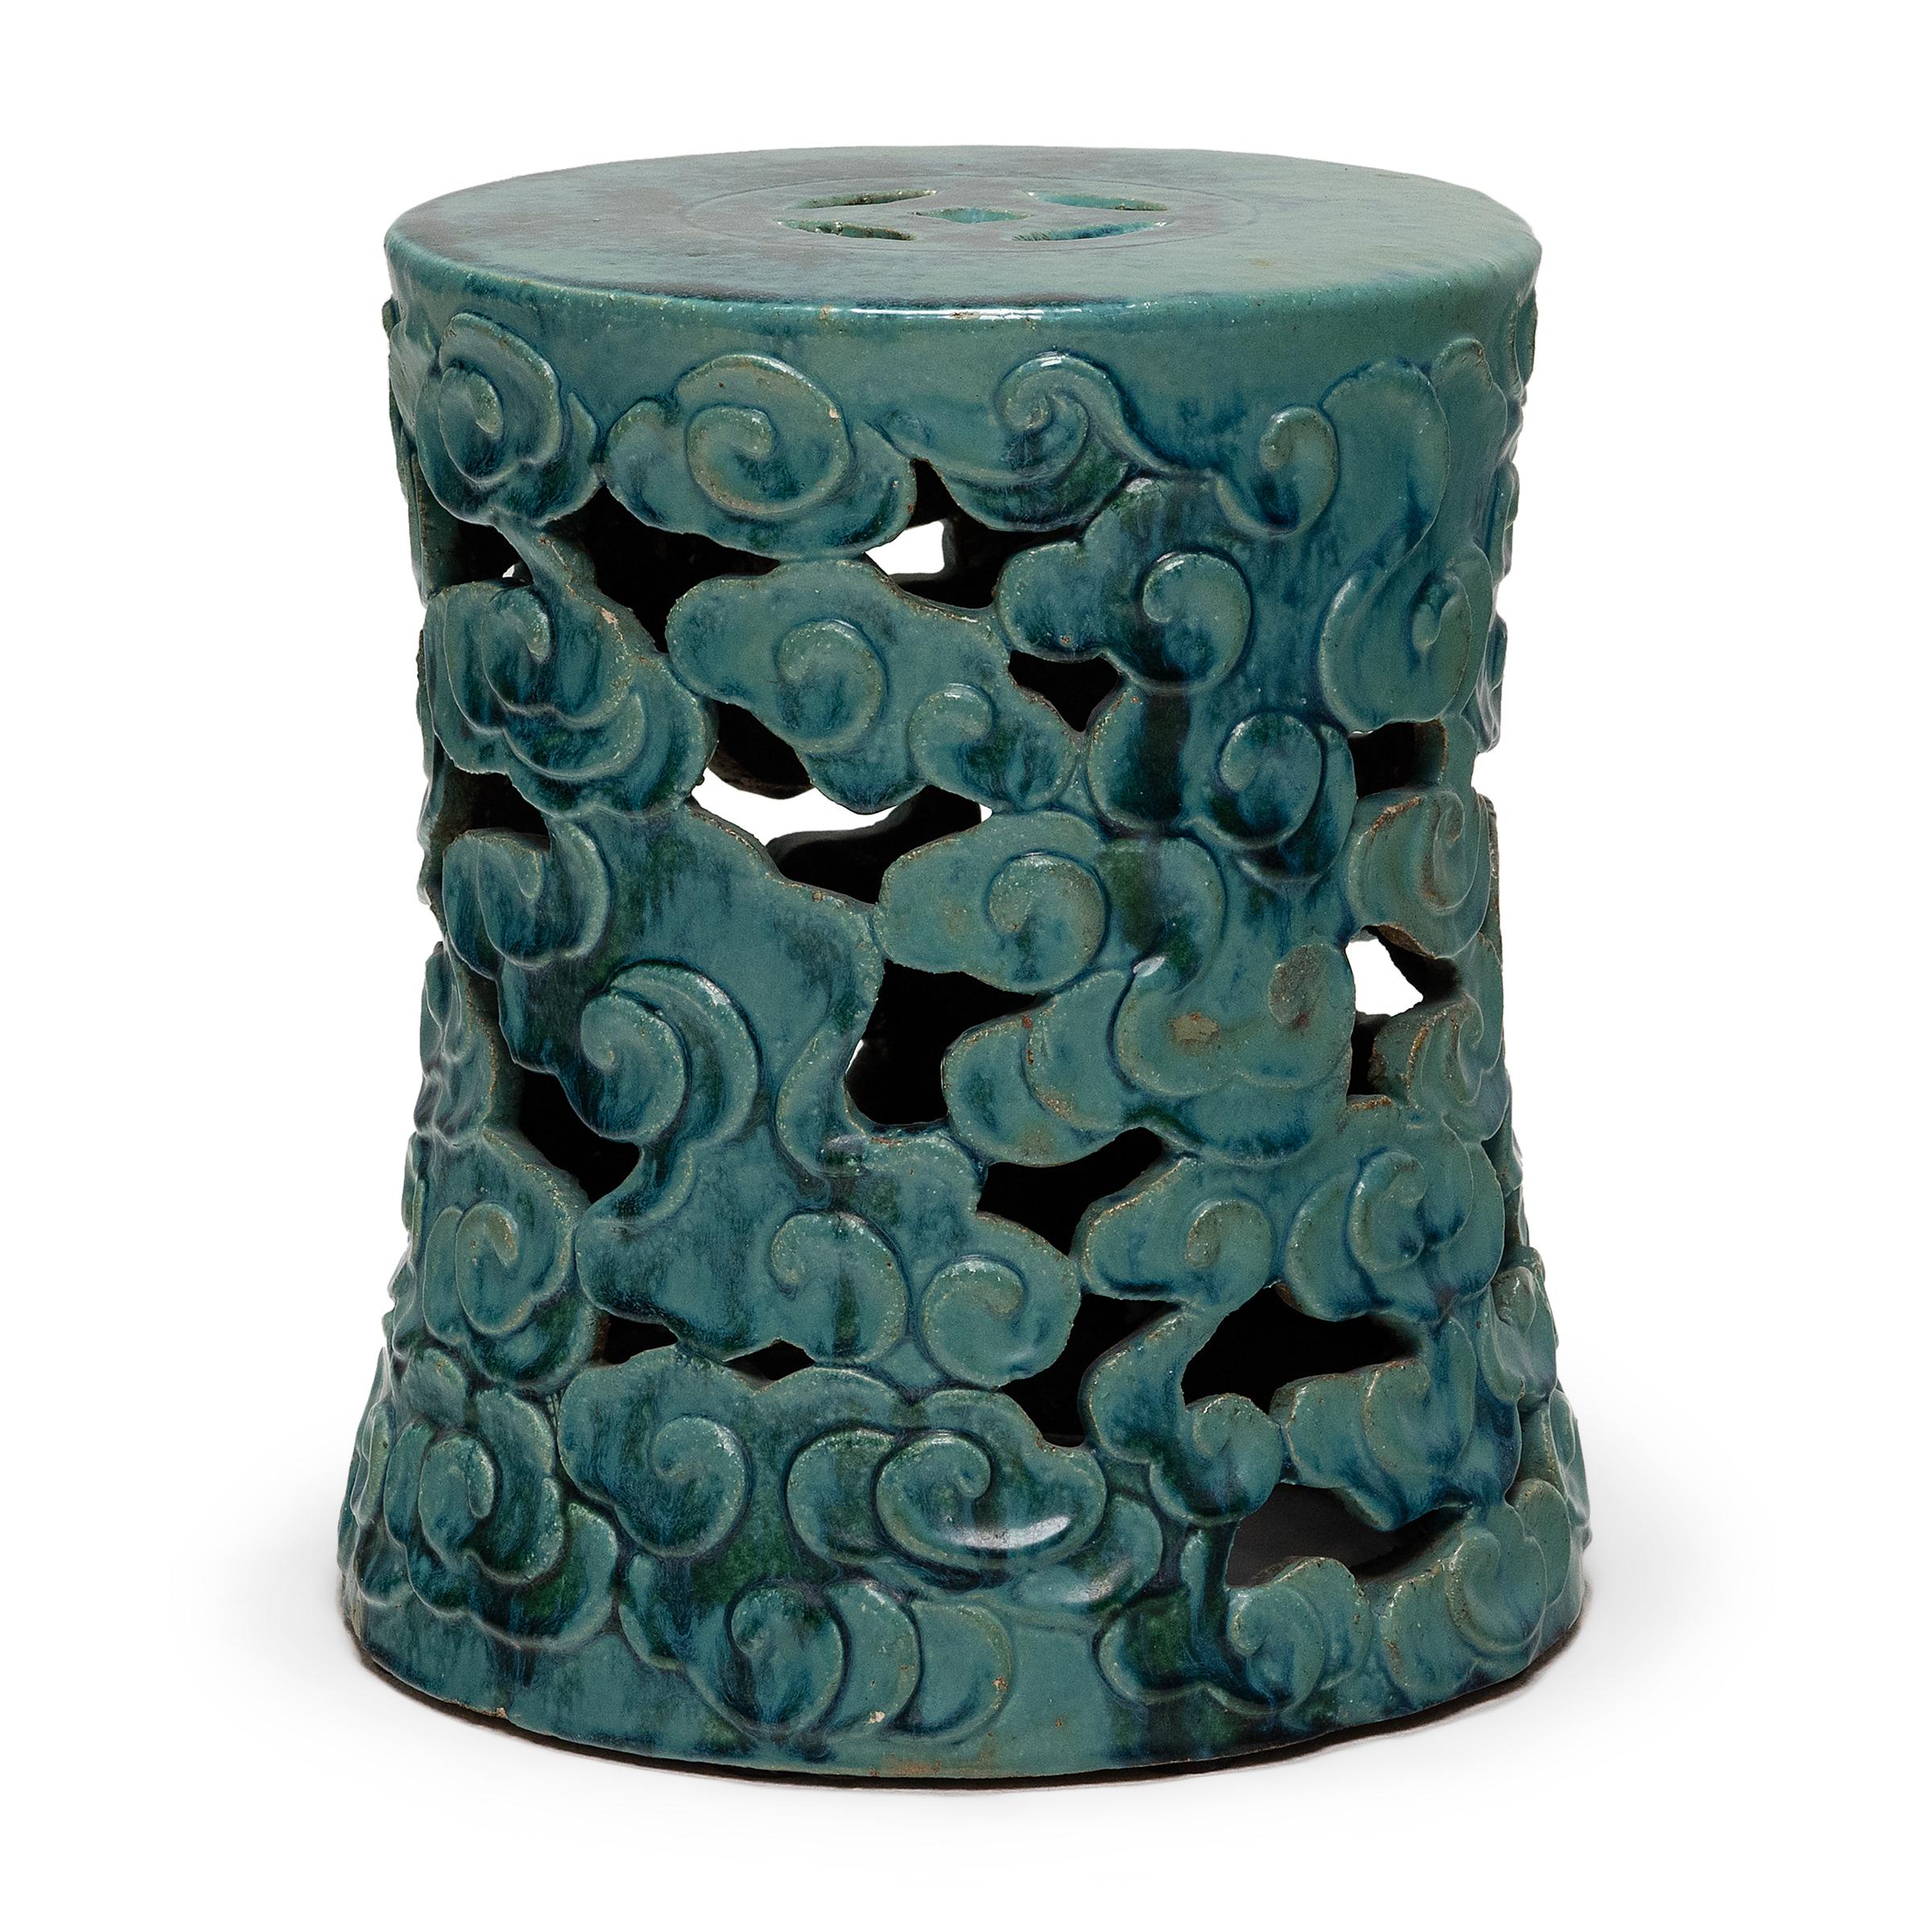 These drum-form garden seats were a fixture of the Qing dynasty garden, used as a multipurpose space to rest one's feet or serve tea. These ceramic garden stools feature convex sides encircled by billowing clouds enveloped in a vibrant turquoise